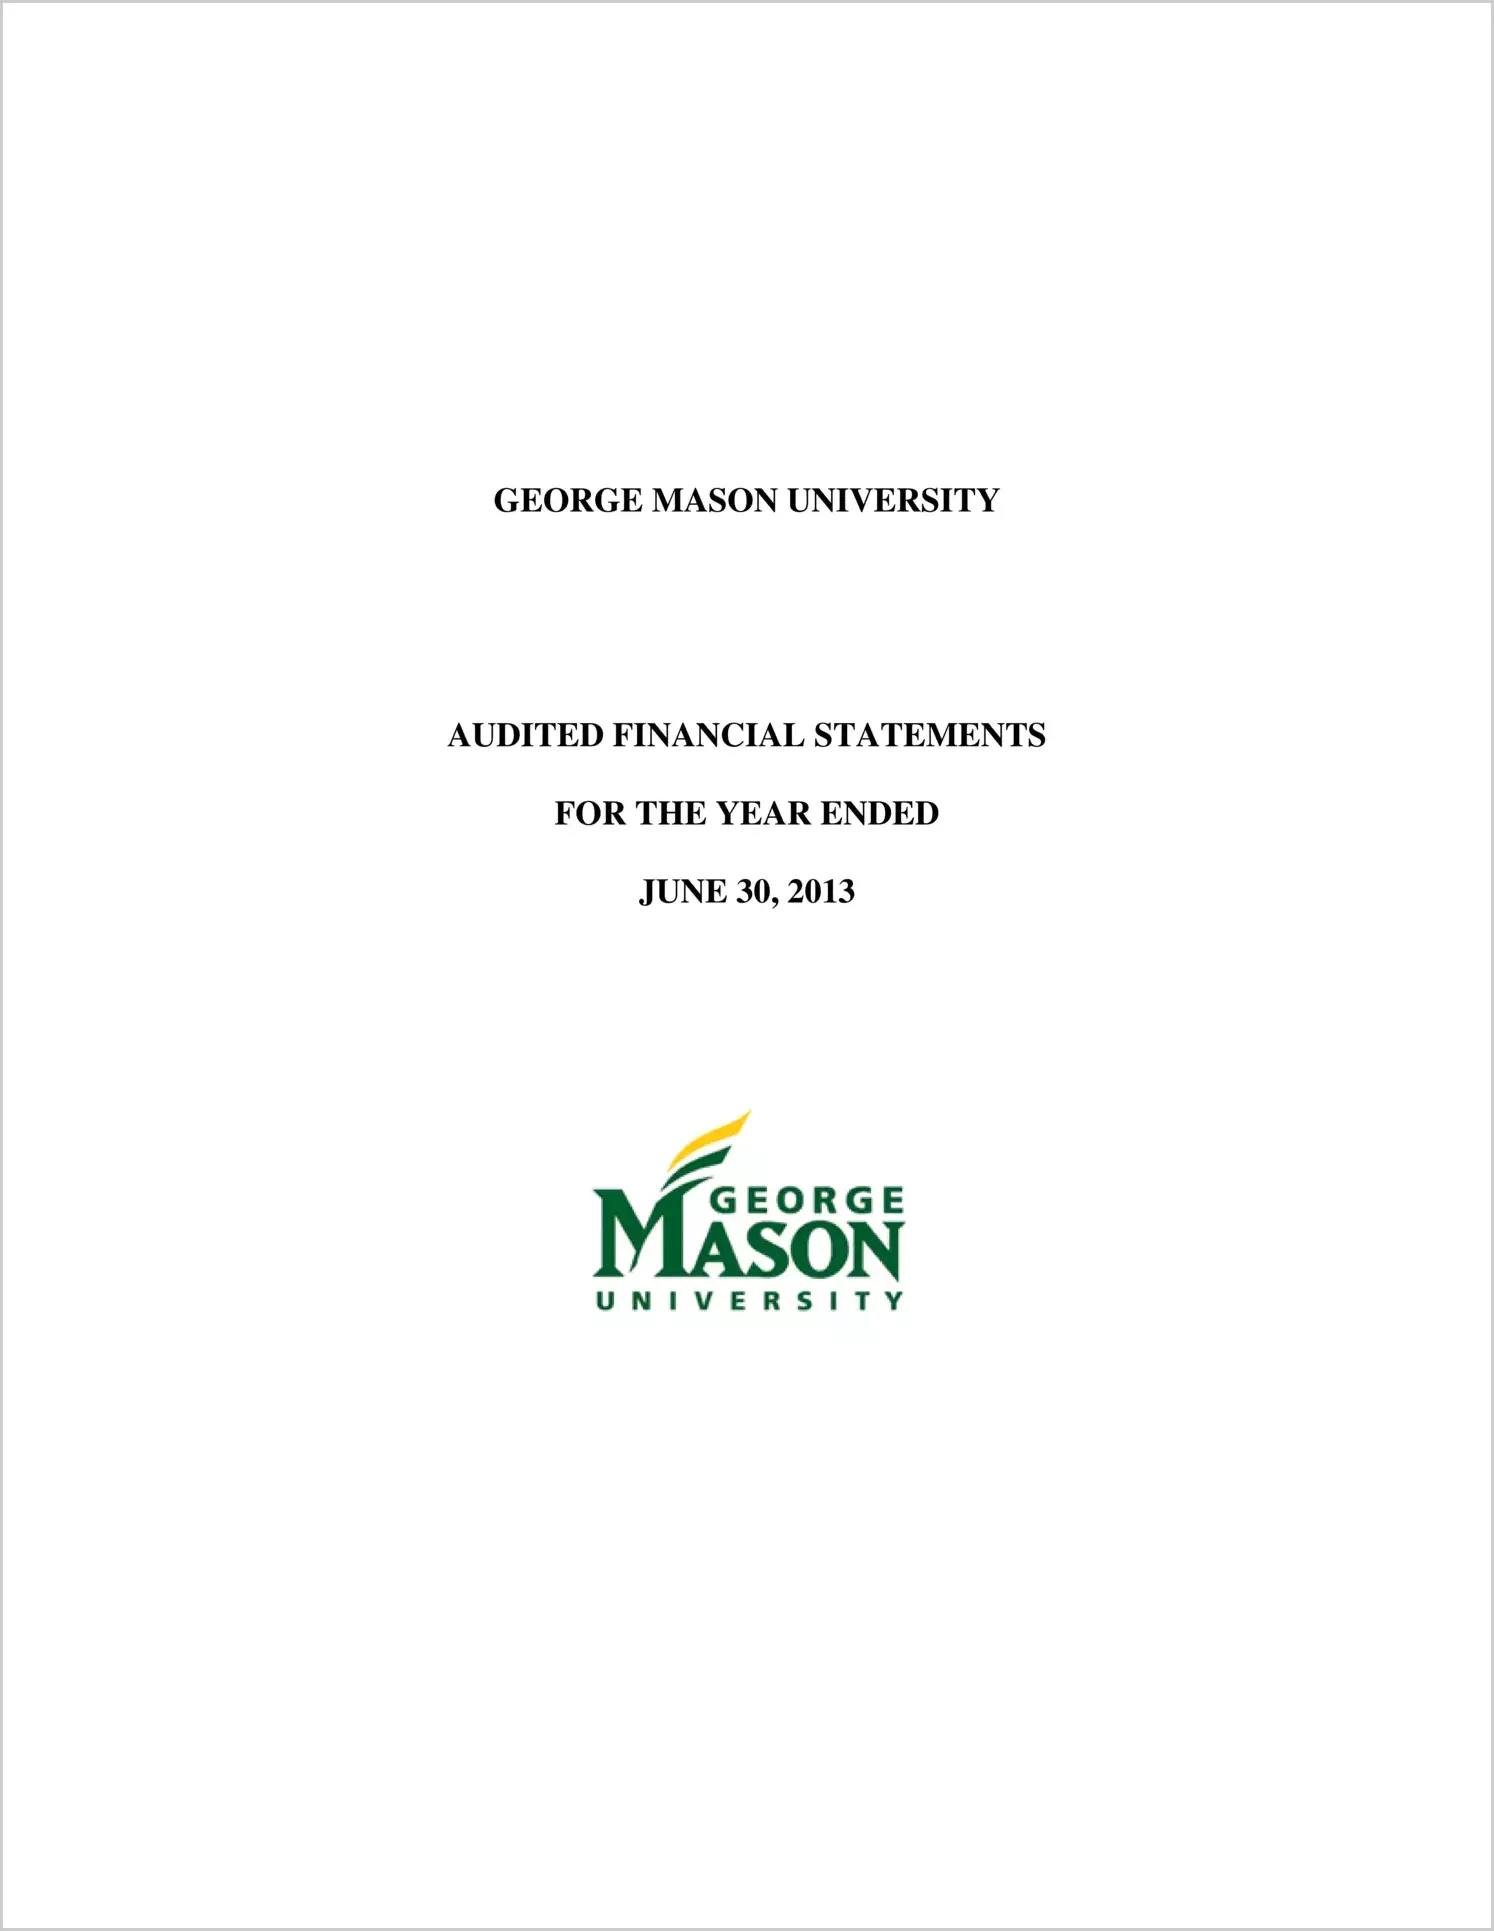 George Mason University Financial Statements for the year ended June 30, 2013